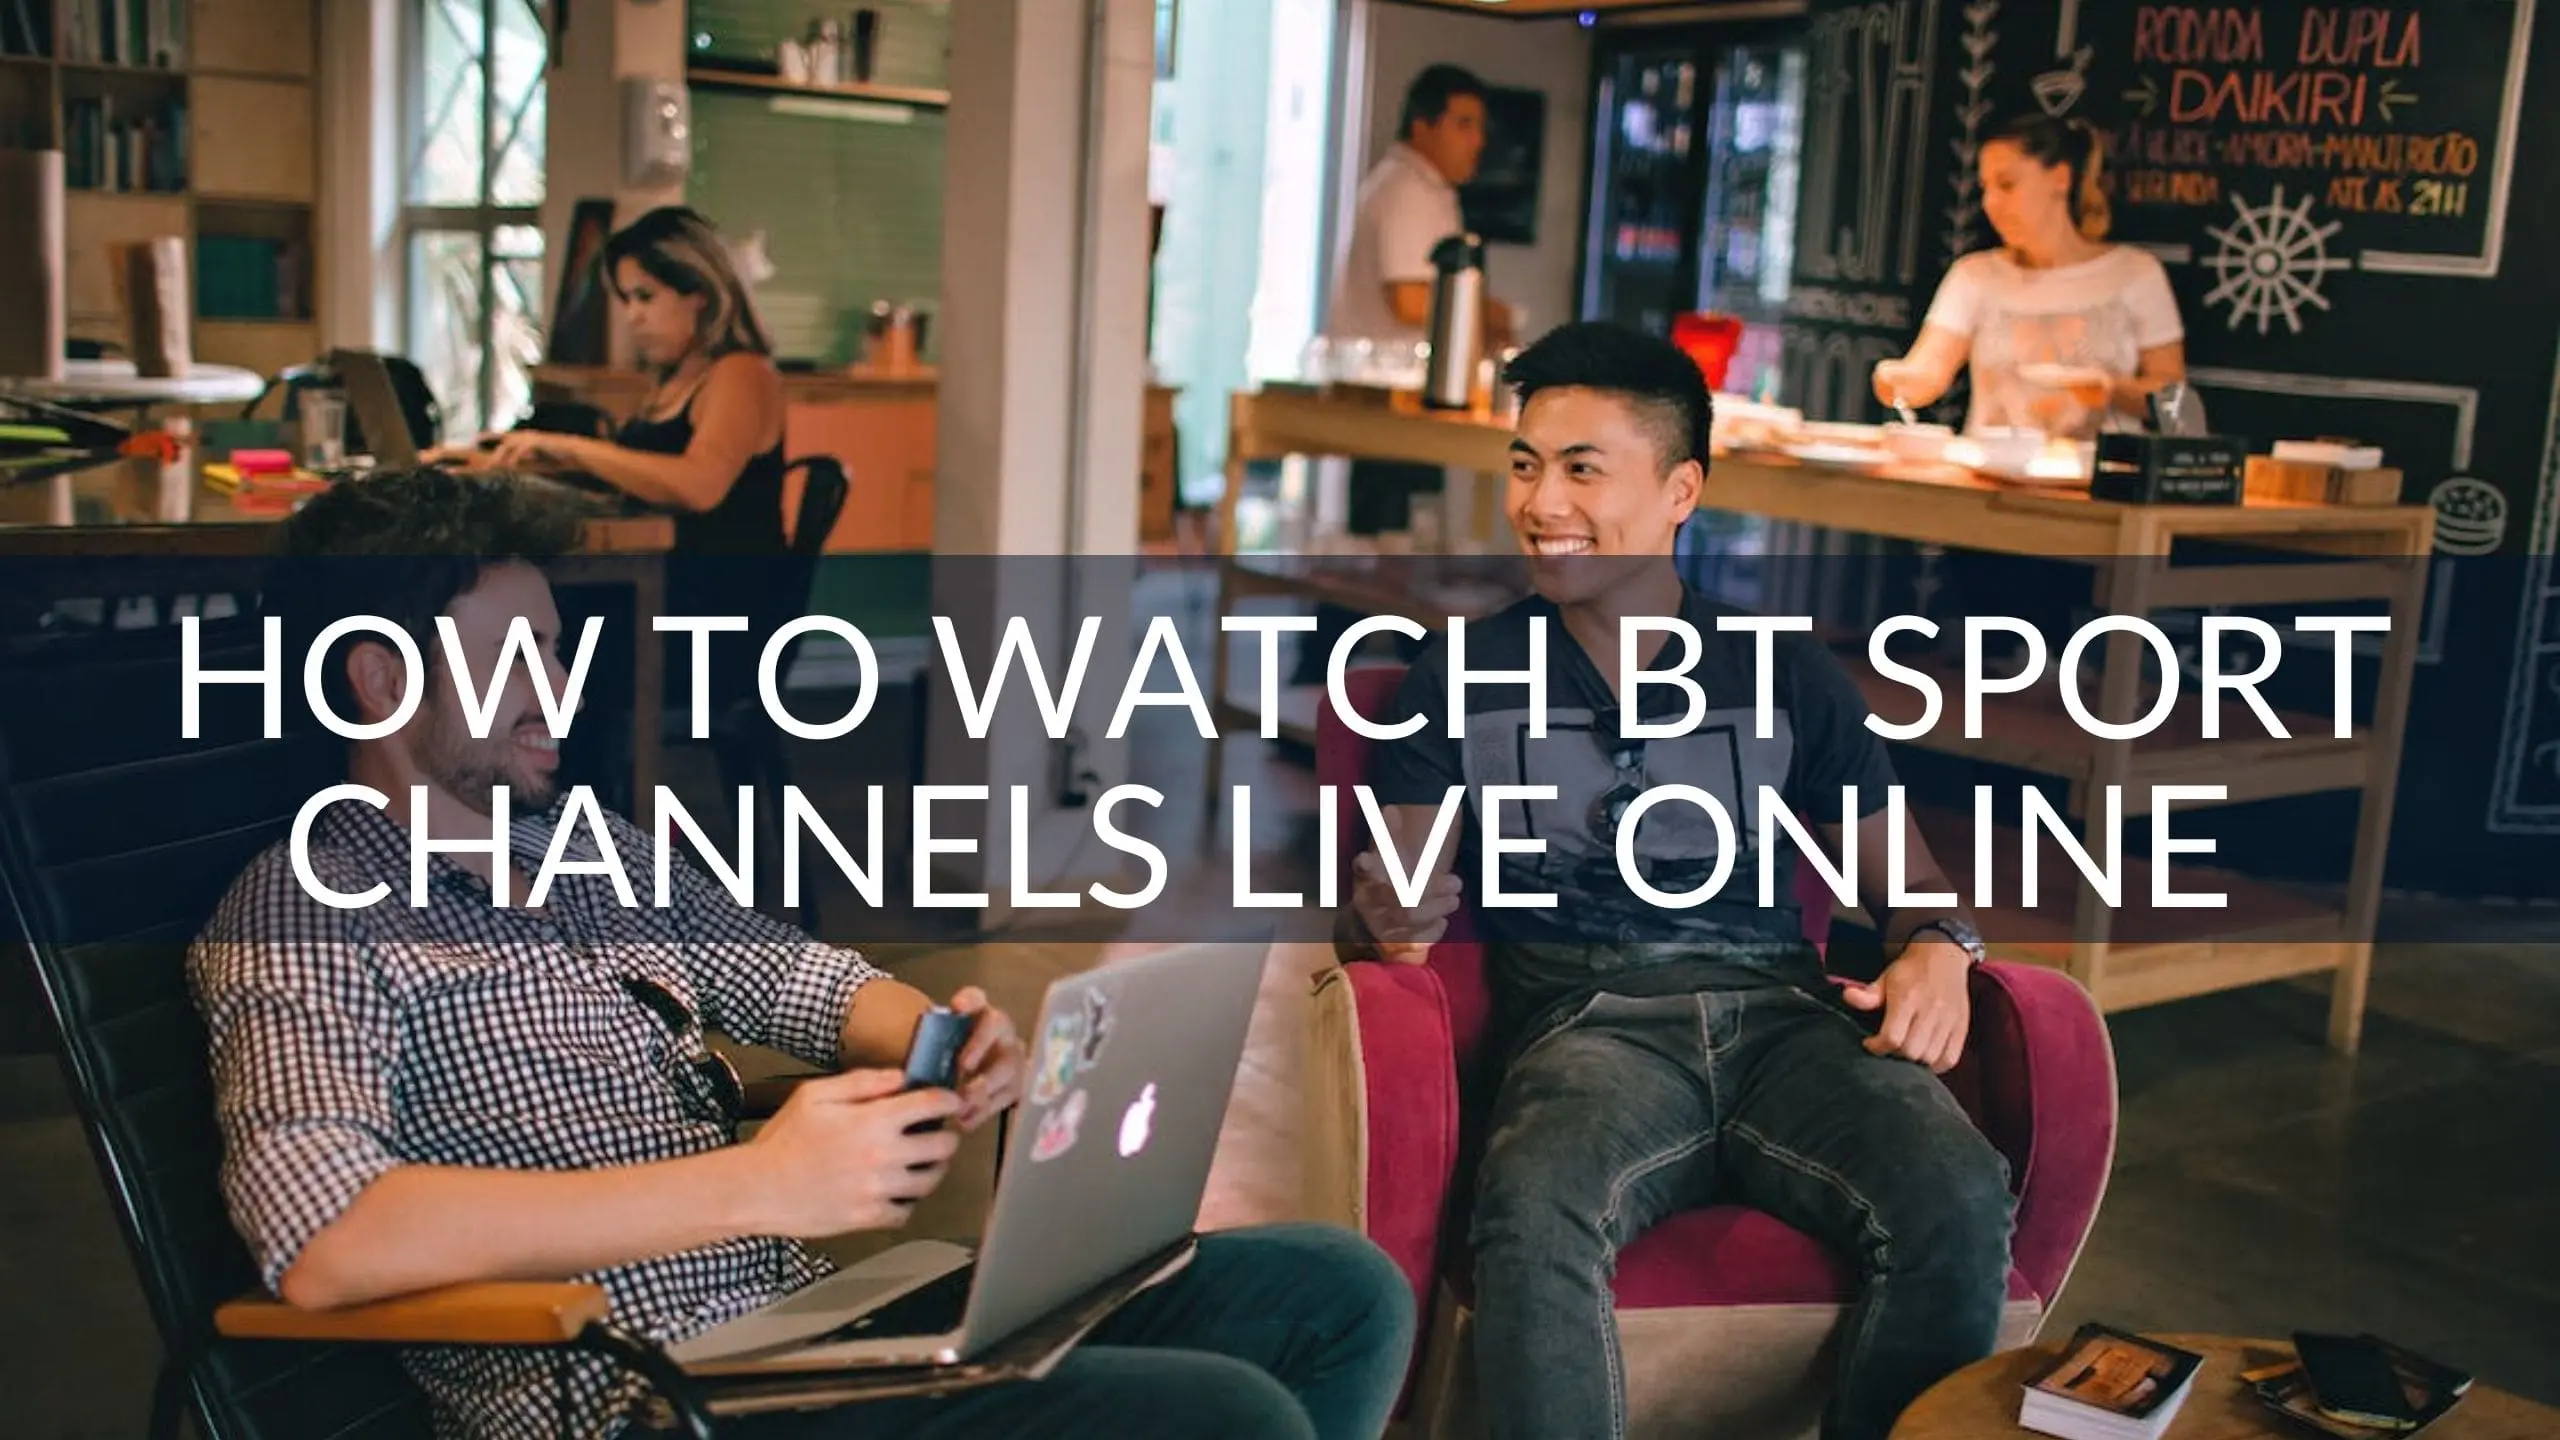 How to Watch BT Sport Channels Live Online with IPTV